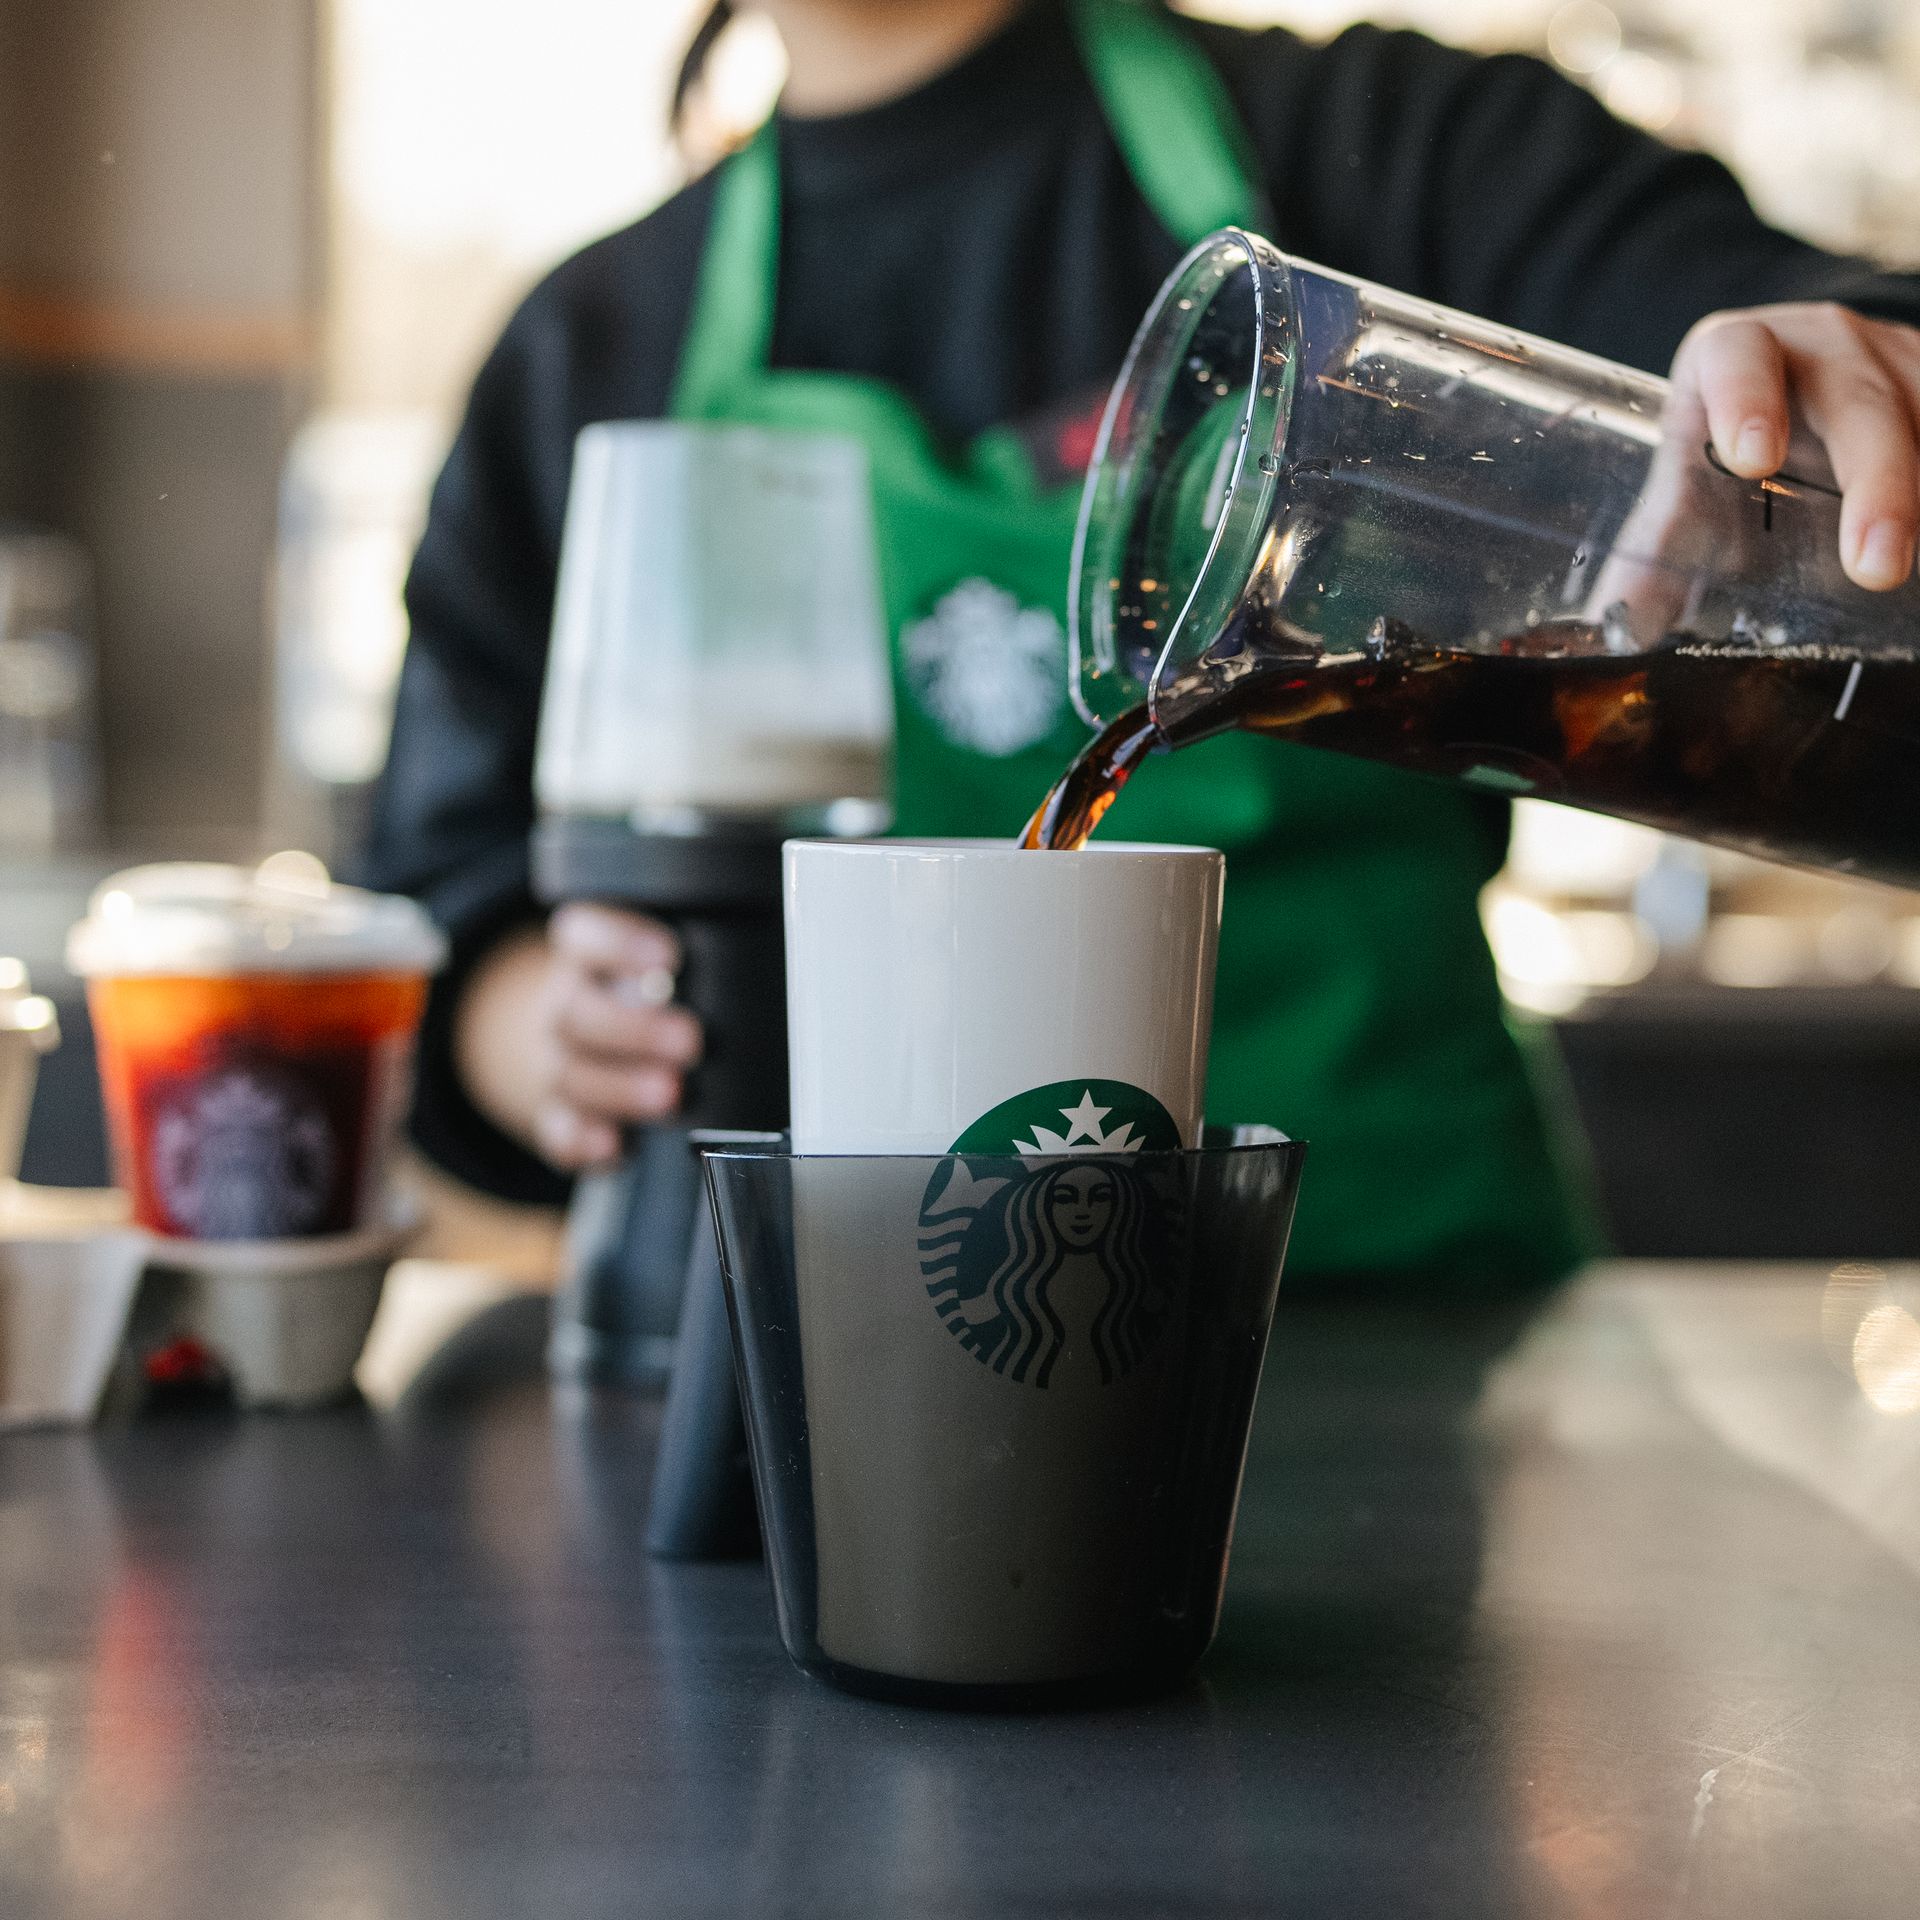 Starbucks Is Bringing Back Its Reusable Cups Safely Thanks to This